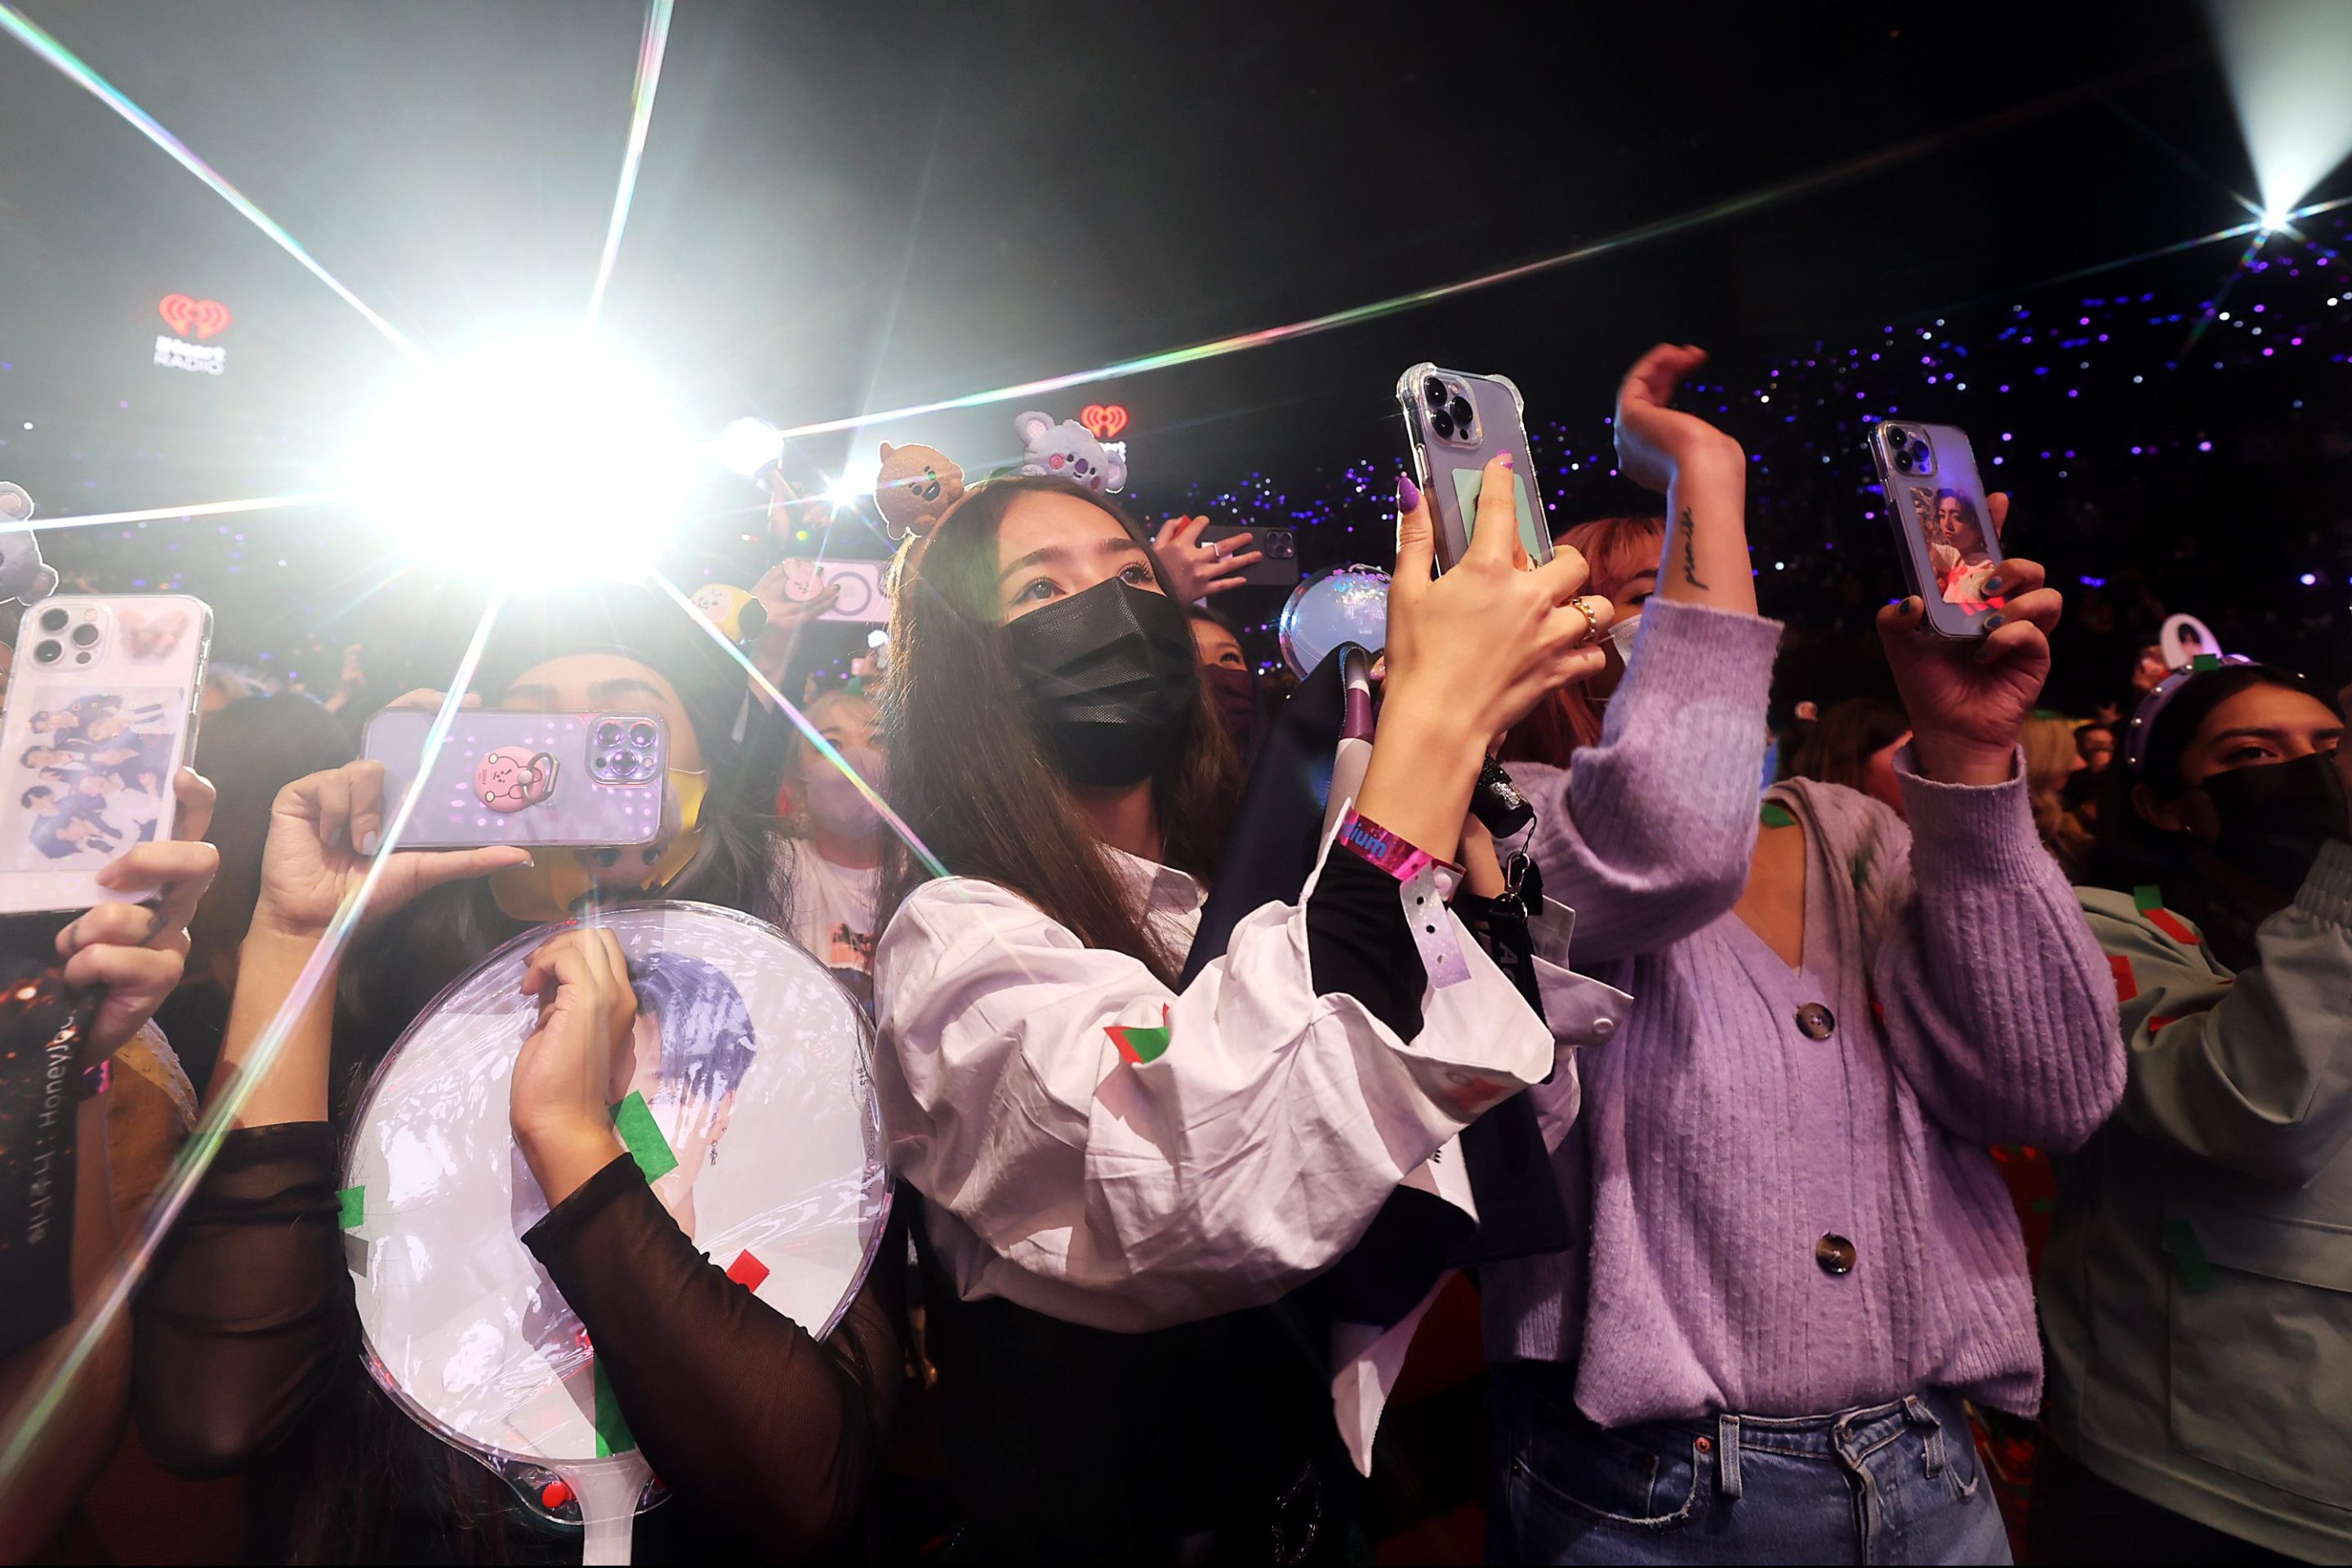 Concert-goers watch BTS perform onstage during iHeartRadio 102.7 KIIS FM's Jingle Ball 2021 presented by Capital One at The Forum on December 03, 2021 in Los Angeles, California.